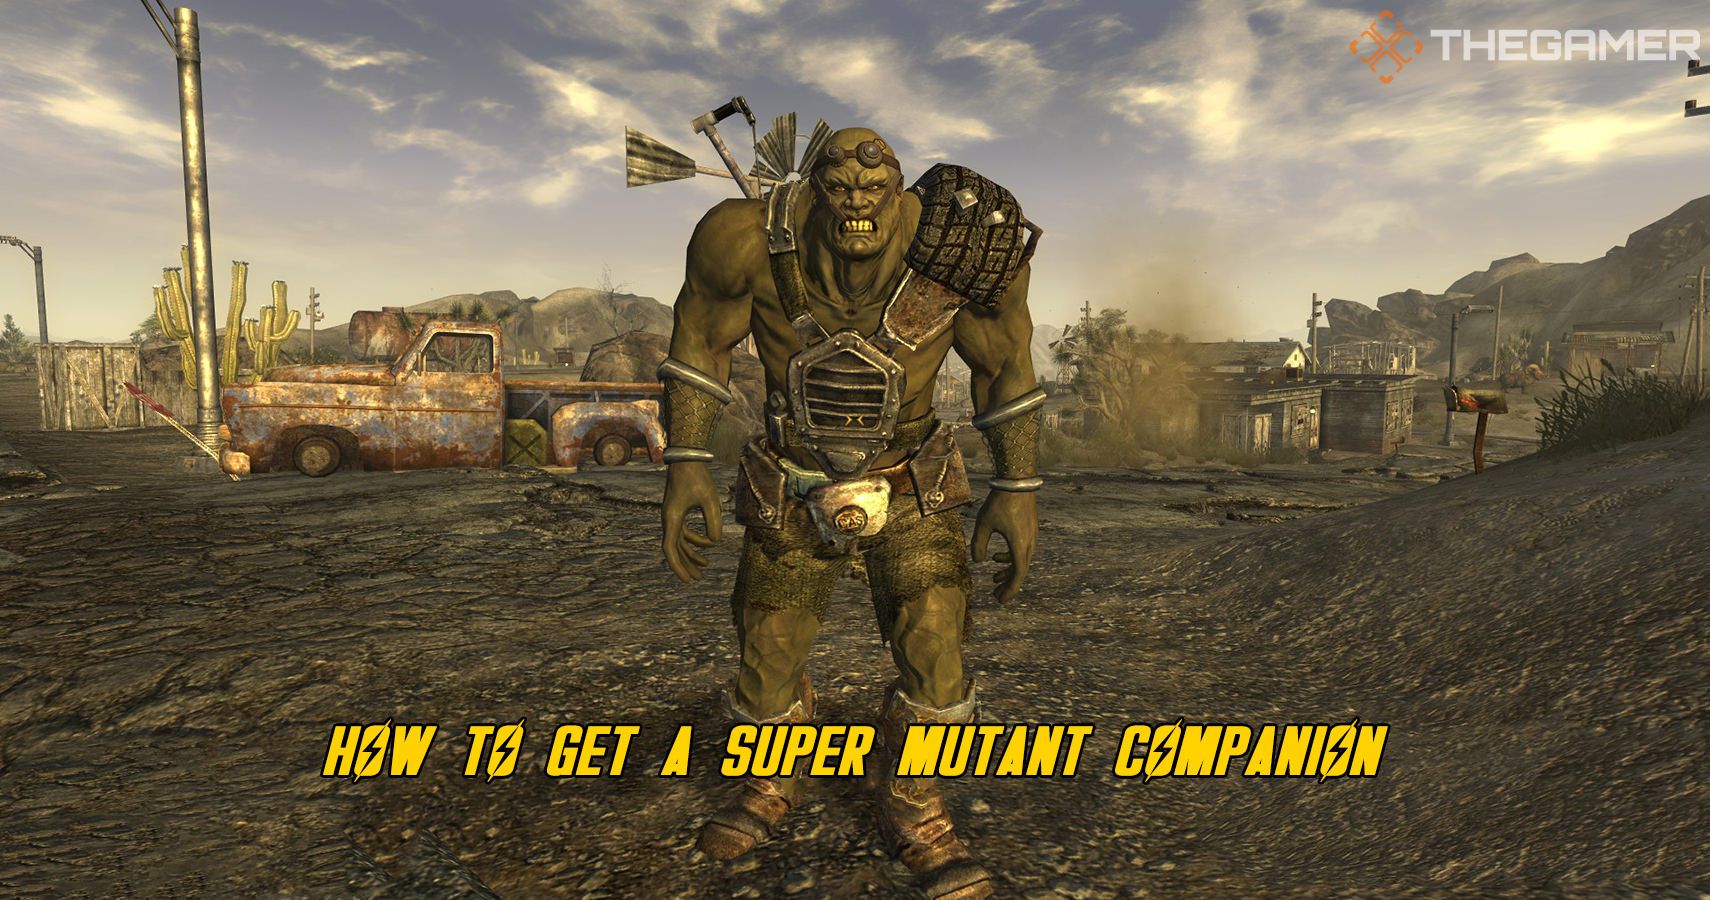 Fallout 3 Companions meet Fallout 4 - NV Companions are next in